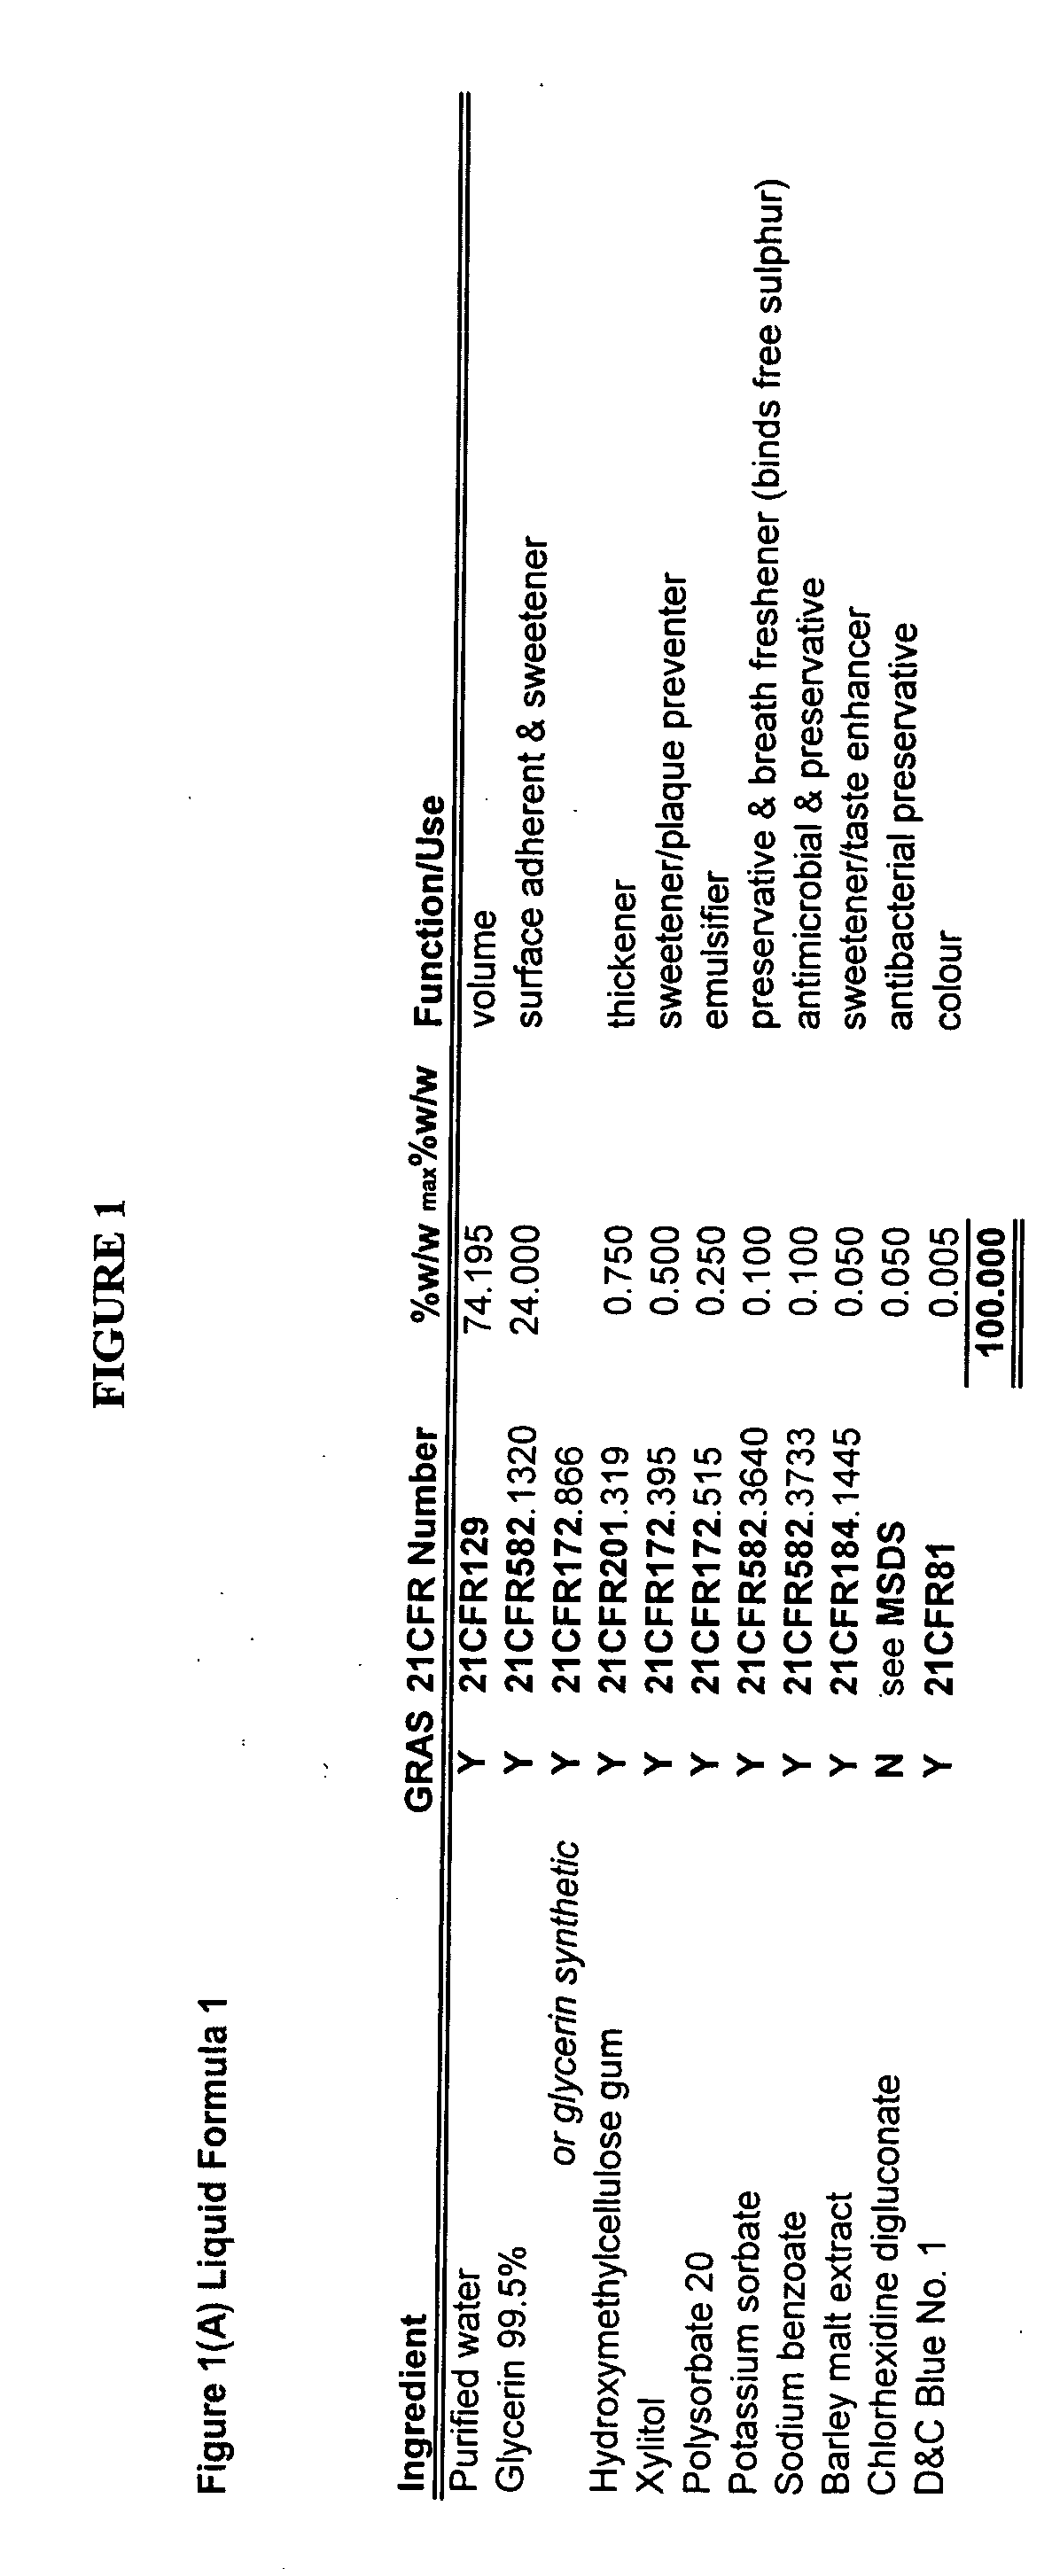 Method and compositions for oral hygiene